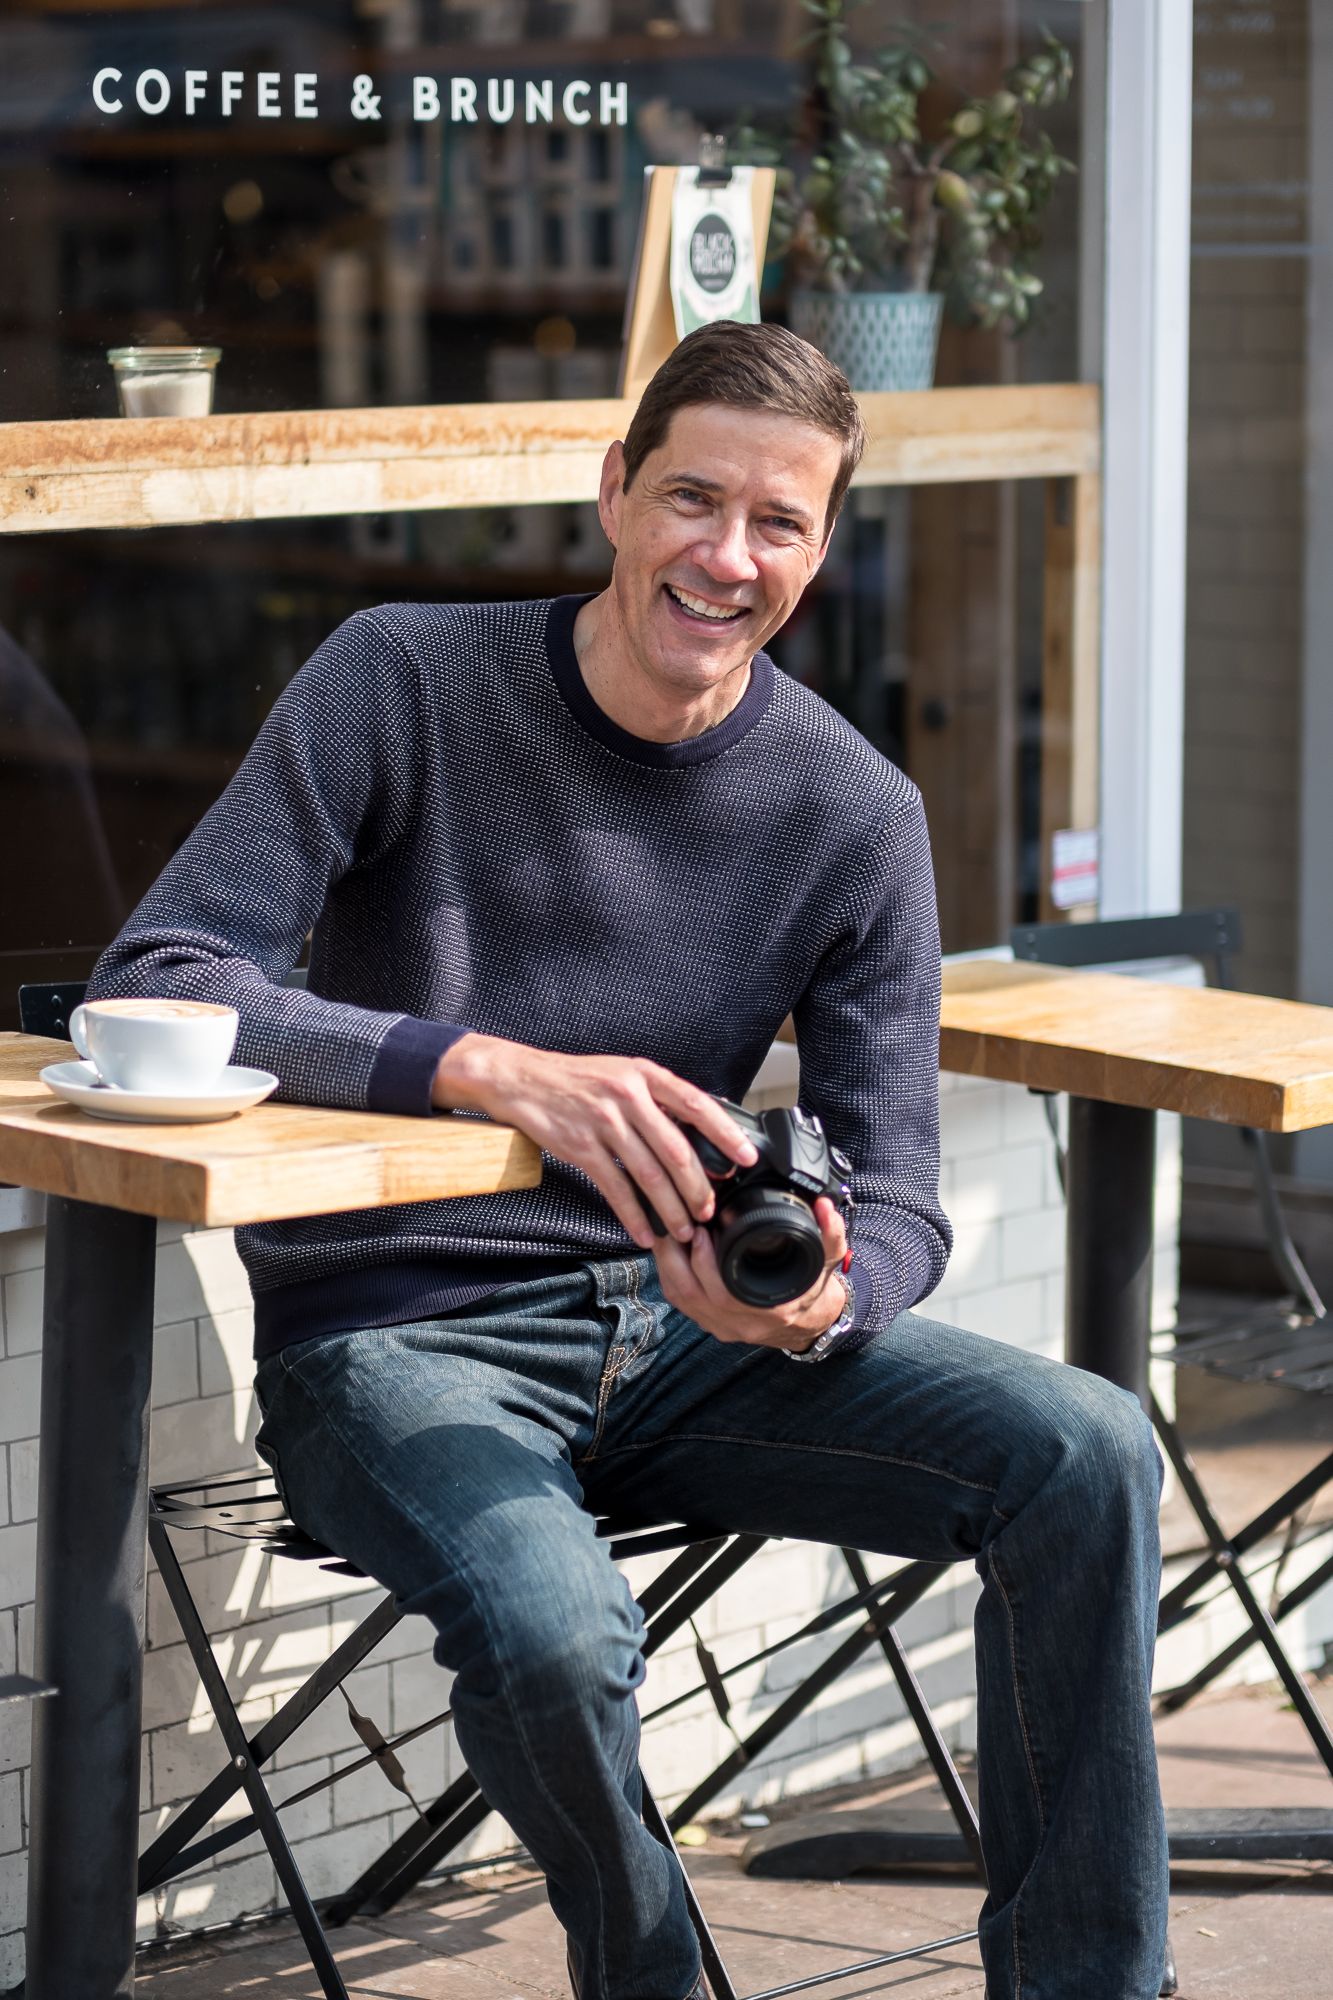 Man sitting outside Black Mocha cafe in Brighton with a cup of coffee, holding his camera and smiling